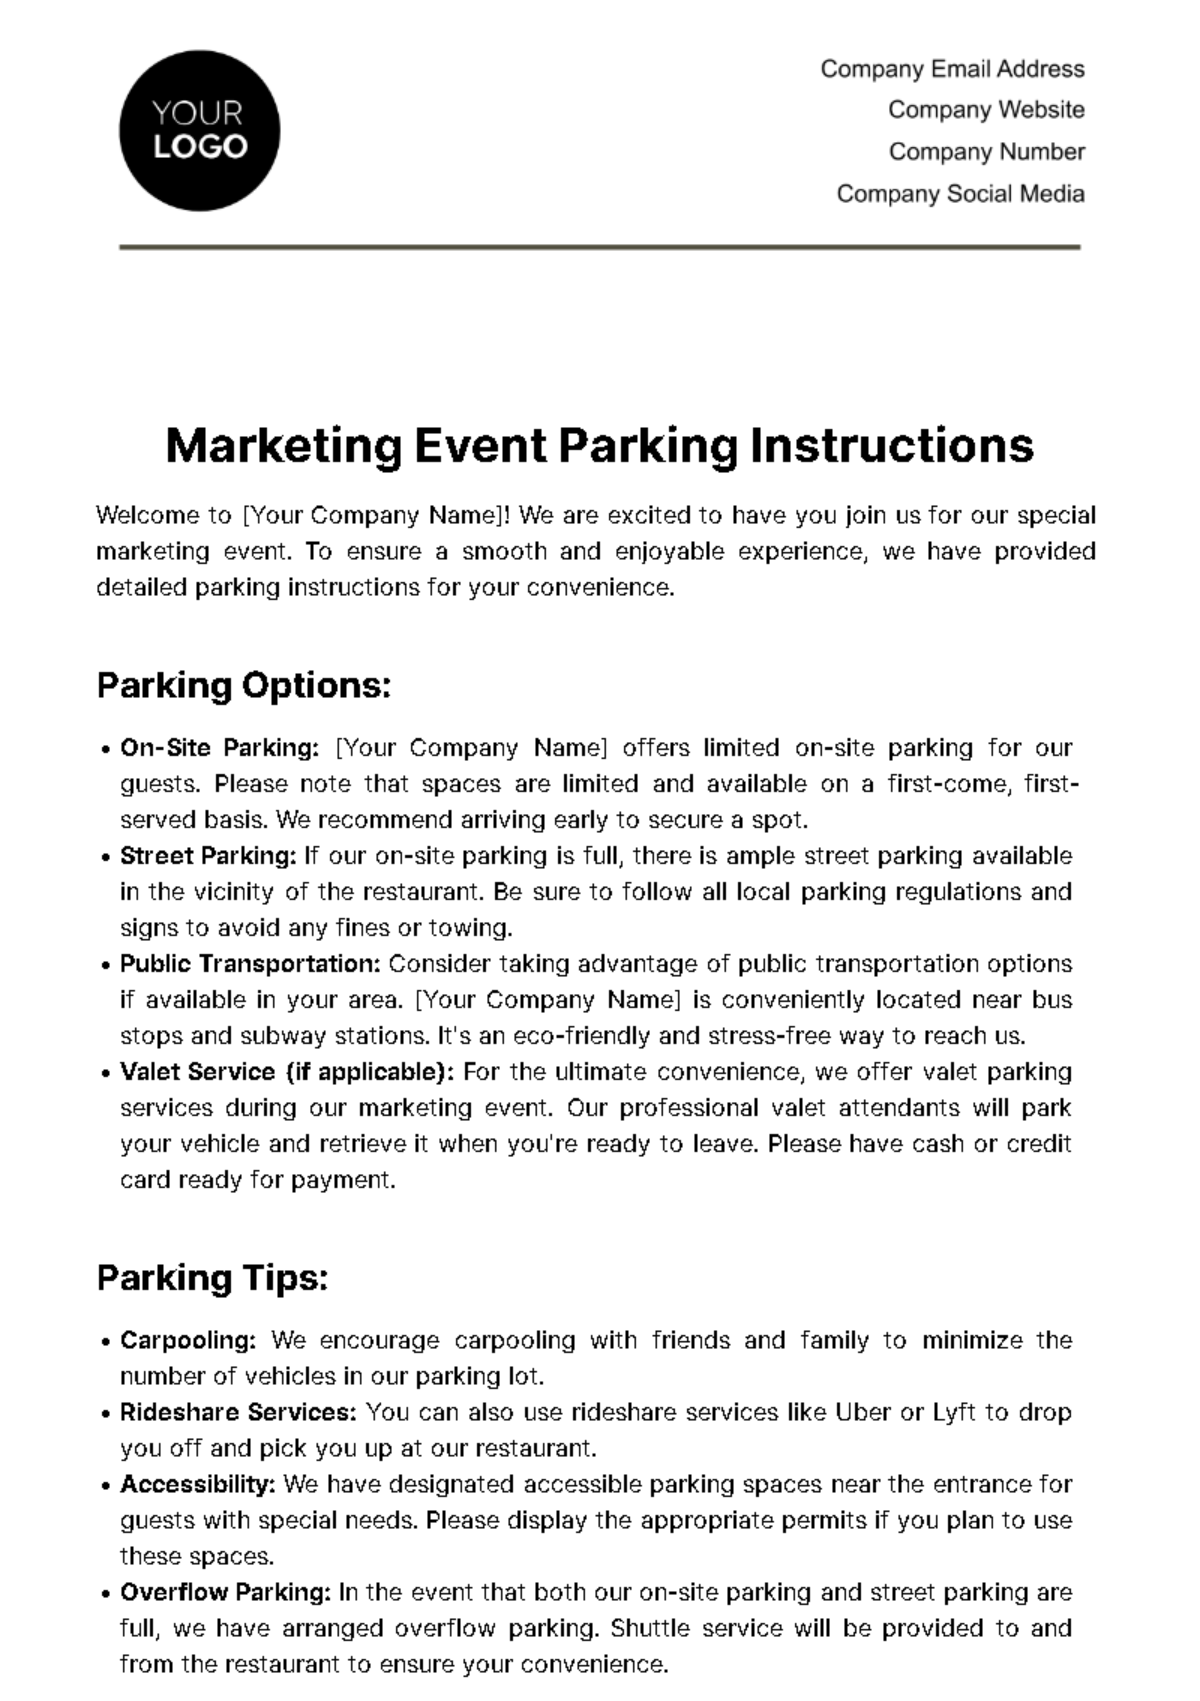 Free Marketing Event Parking Instructions Template